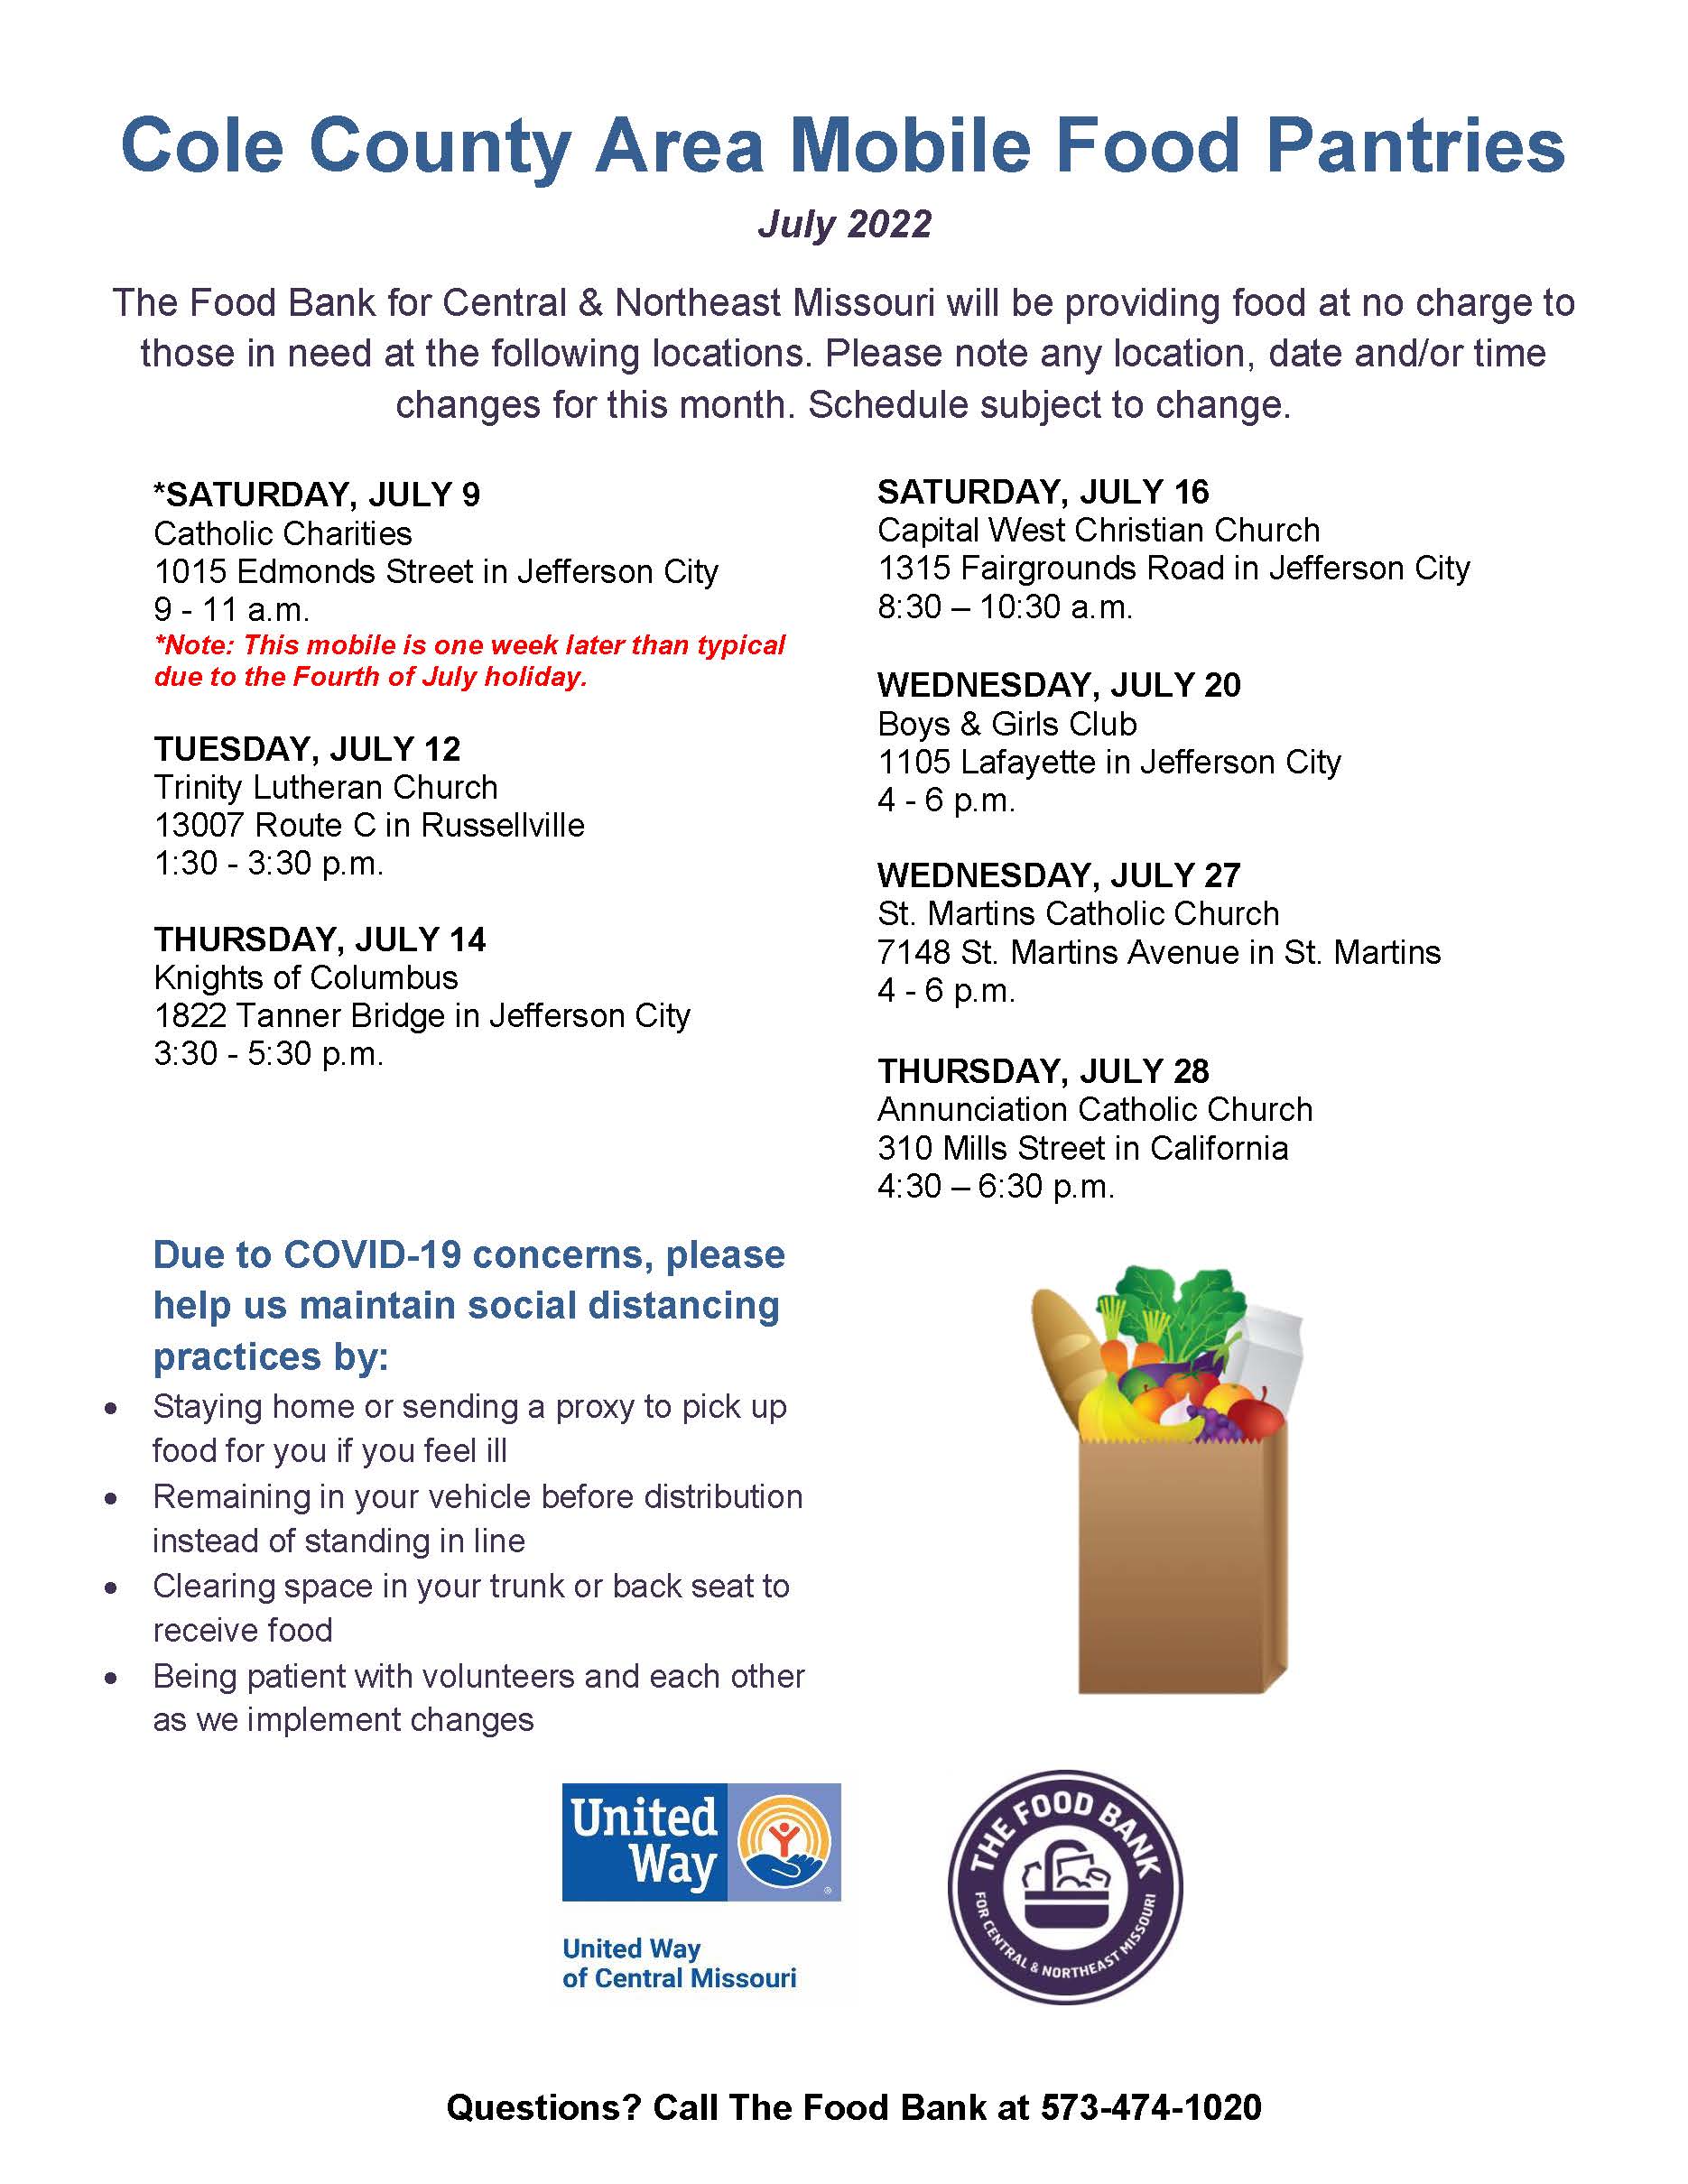 Mobile Food Pantry @ Trinity Lutheran Church on July 12 from 1:30 - 3:30 pm